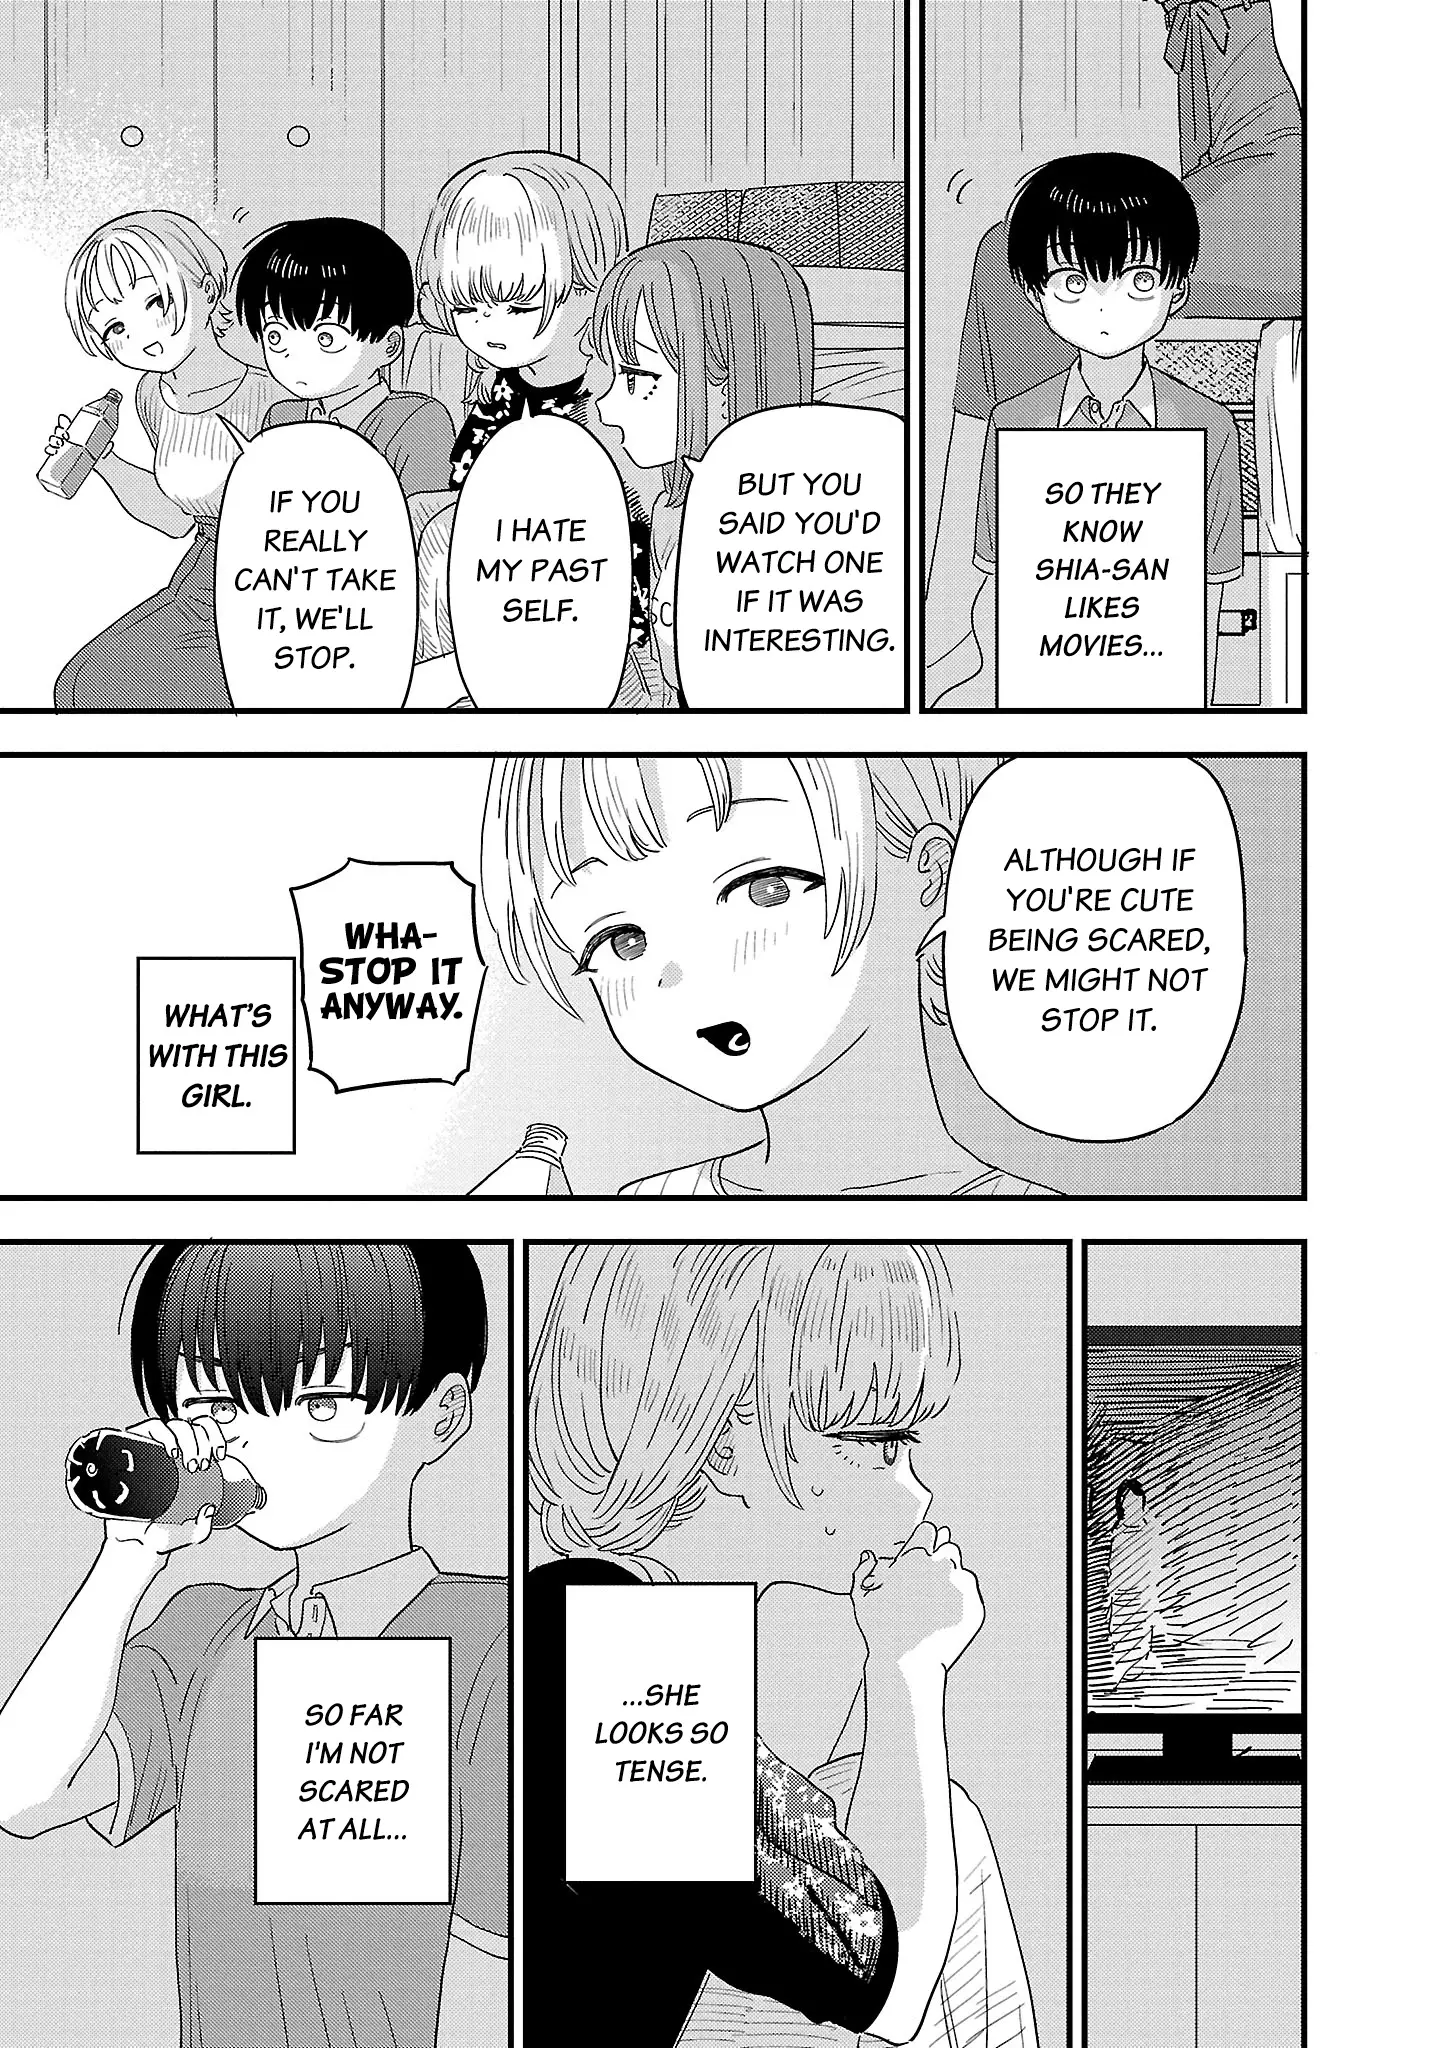 I'm In Love With The Older Girl Next Door - 21 page 10-3969fa0c